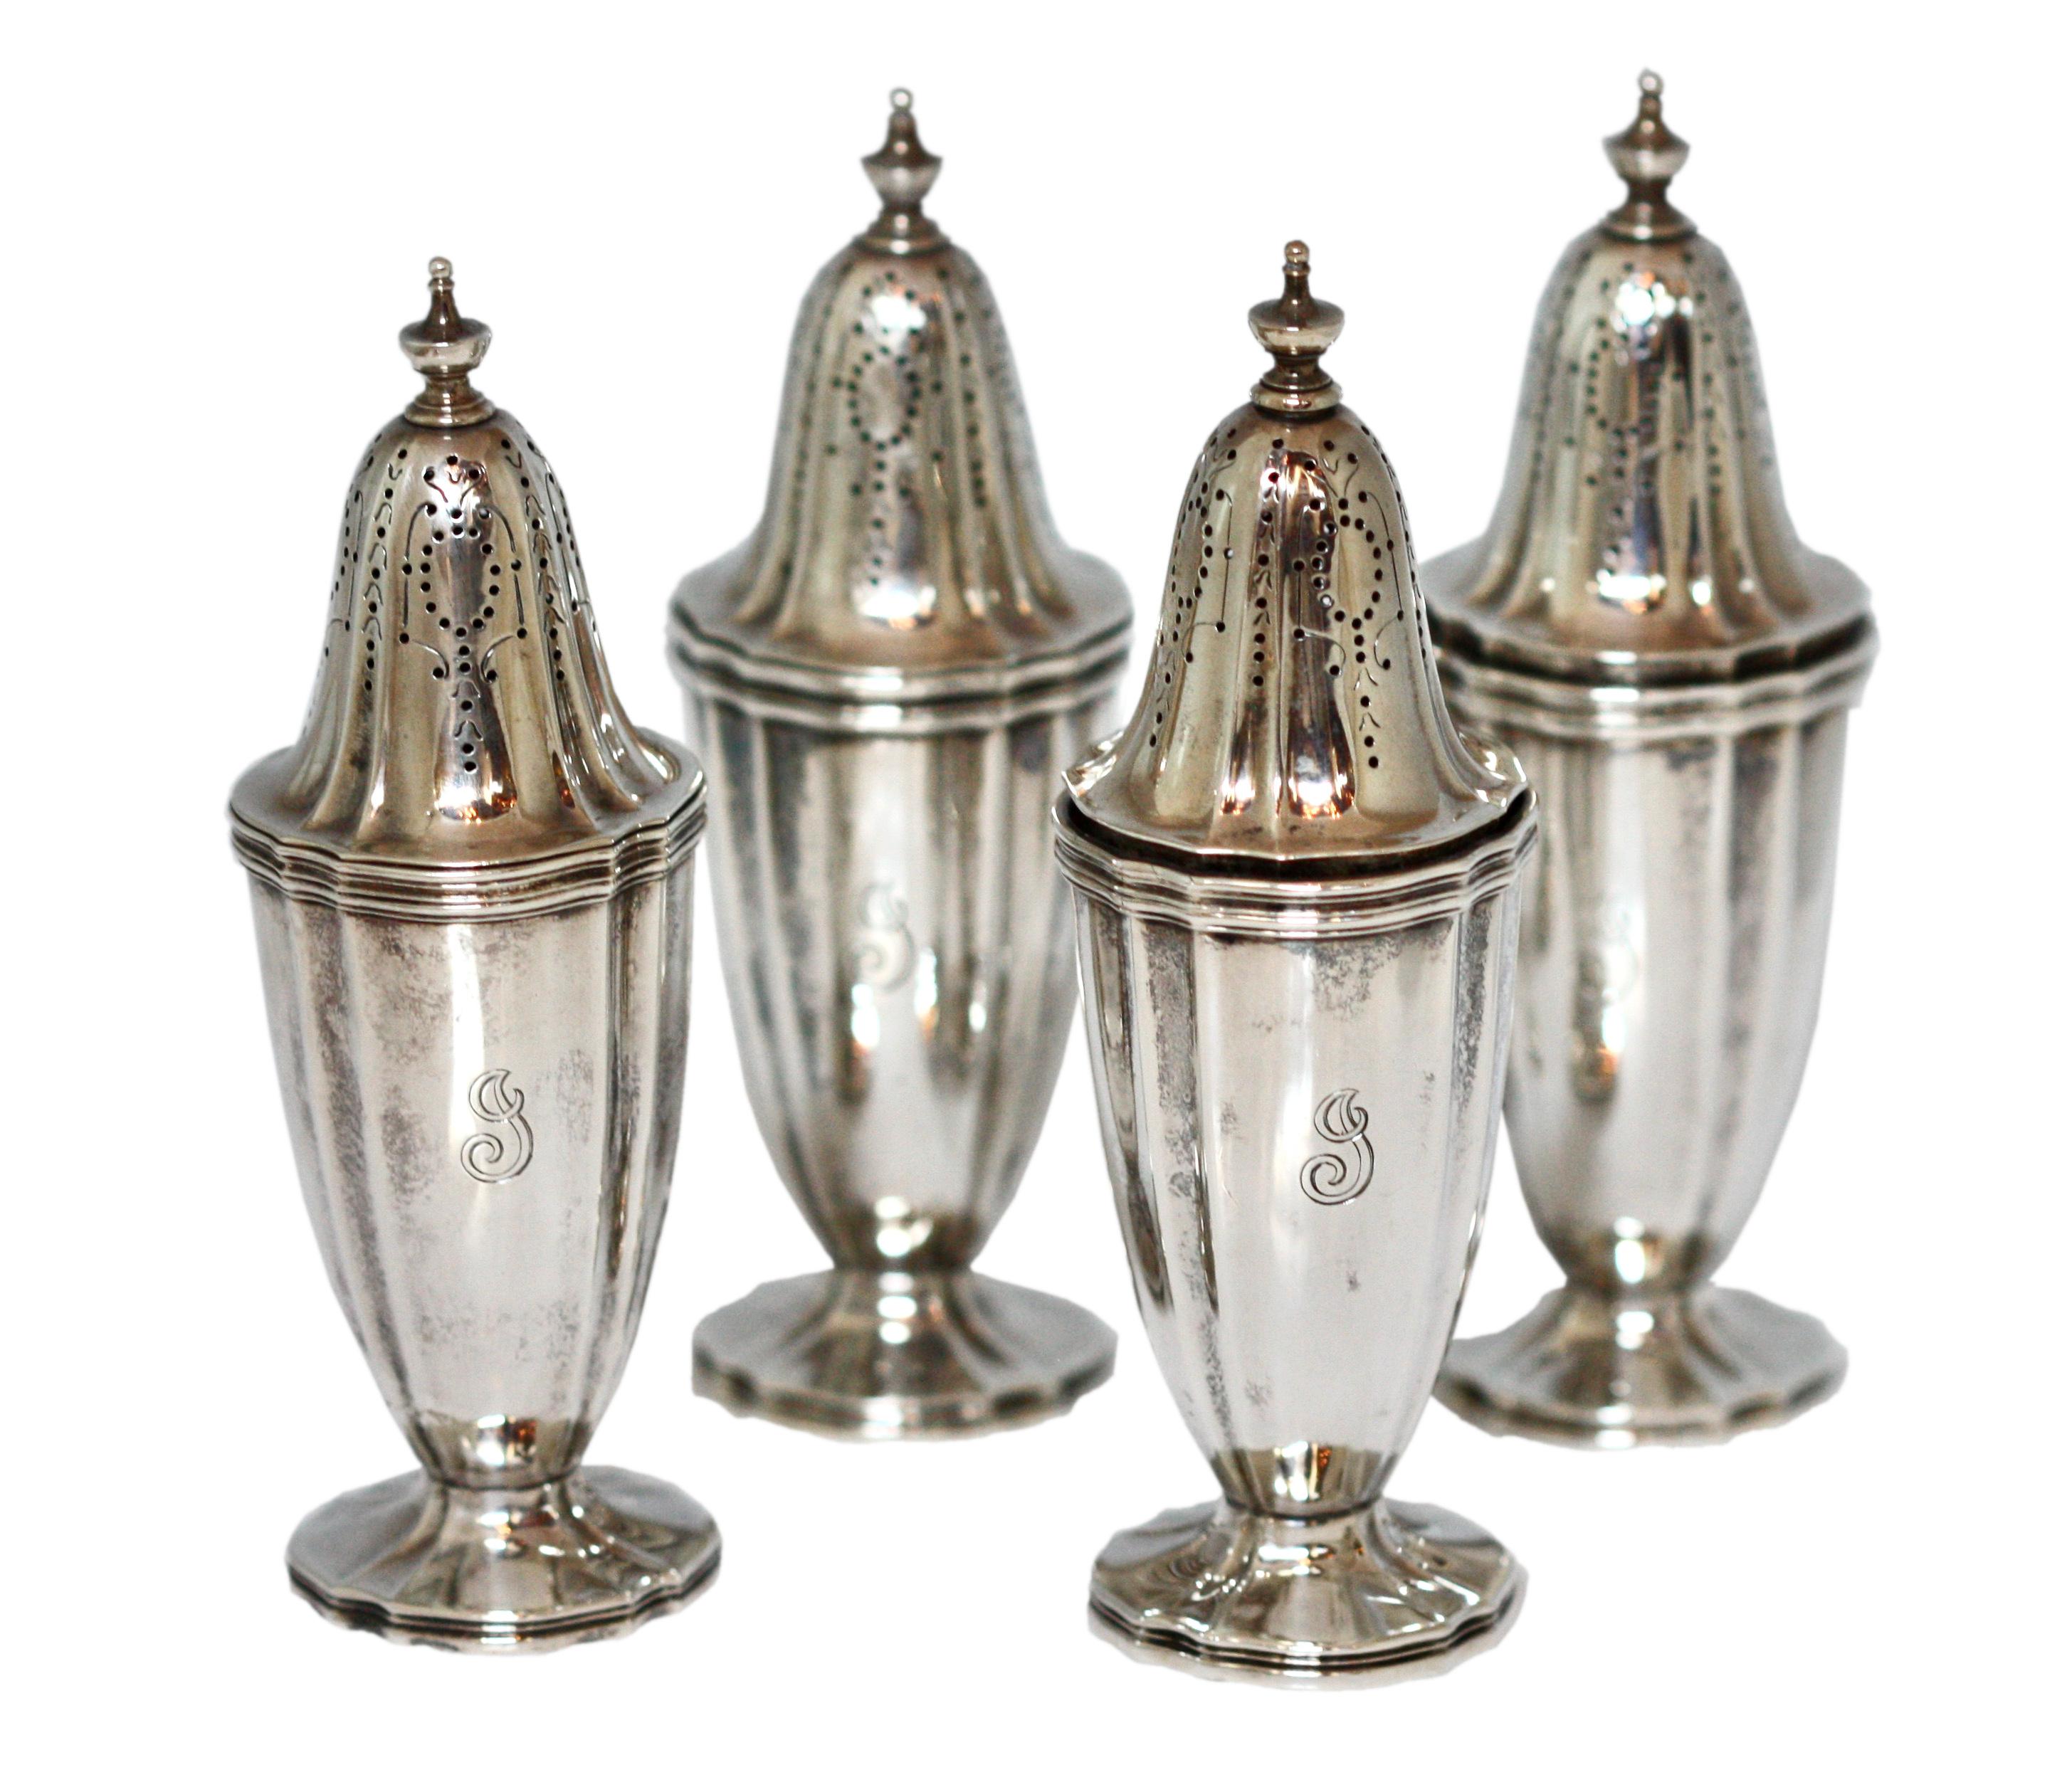 A set of eight, Tiffany & Co., sterling silver open salts & pepper shakers, 1907-1938, comprising four shakers and four salts, with shaped foot and fluted body, monogramed G
each marked underneath:
TIFFANY & CO. MAKERS
STERLING
925/1000
height